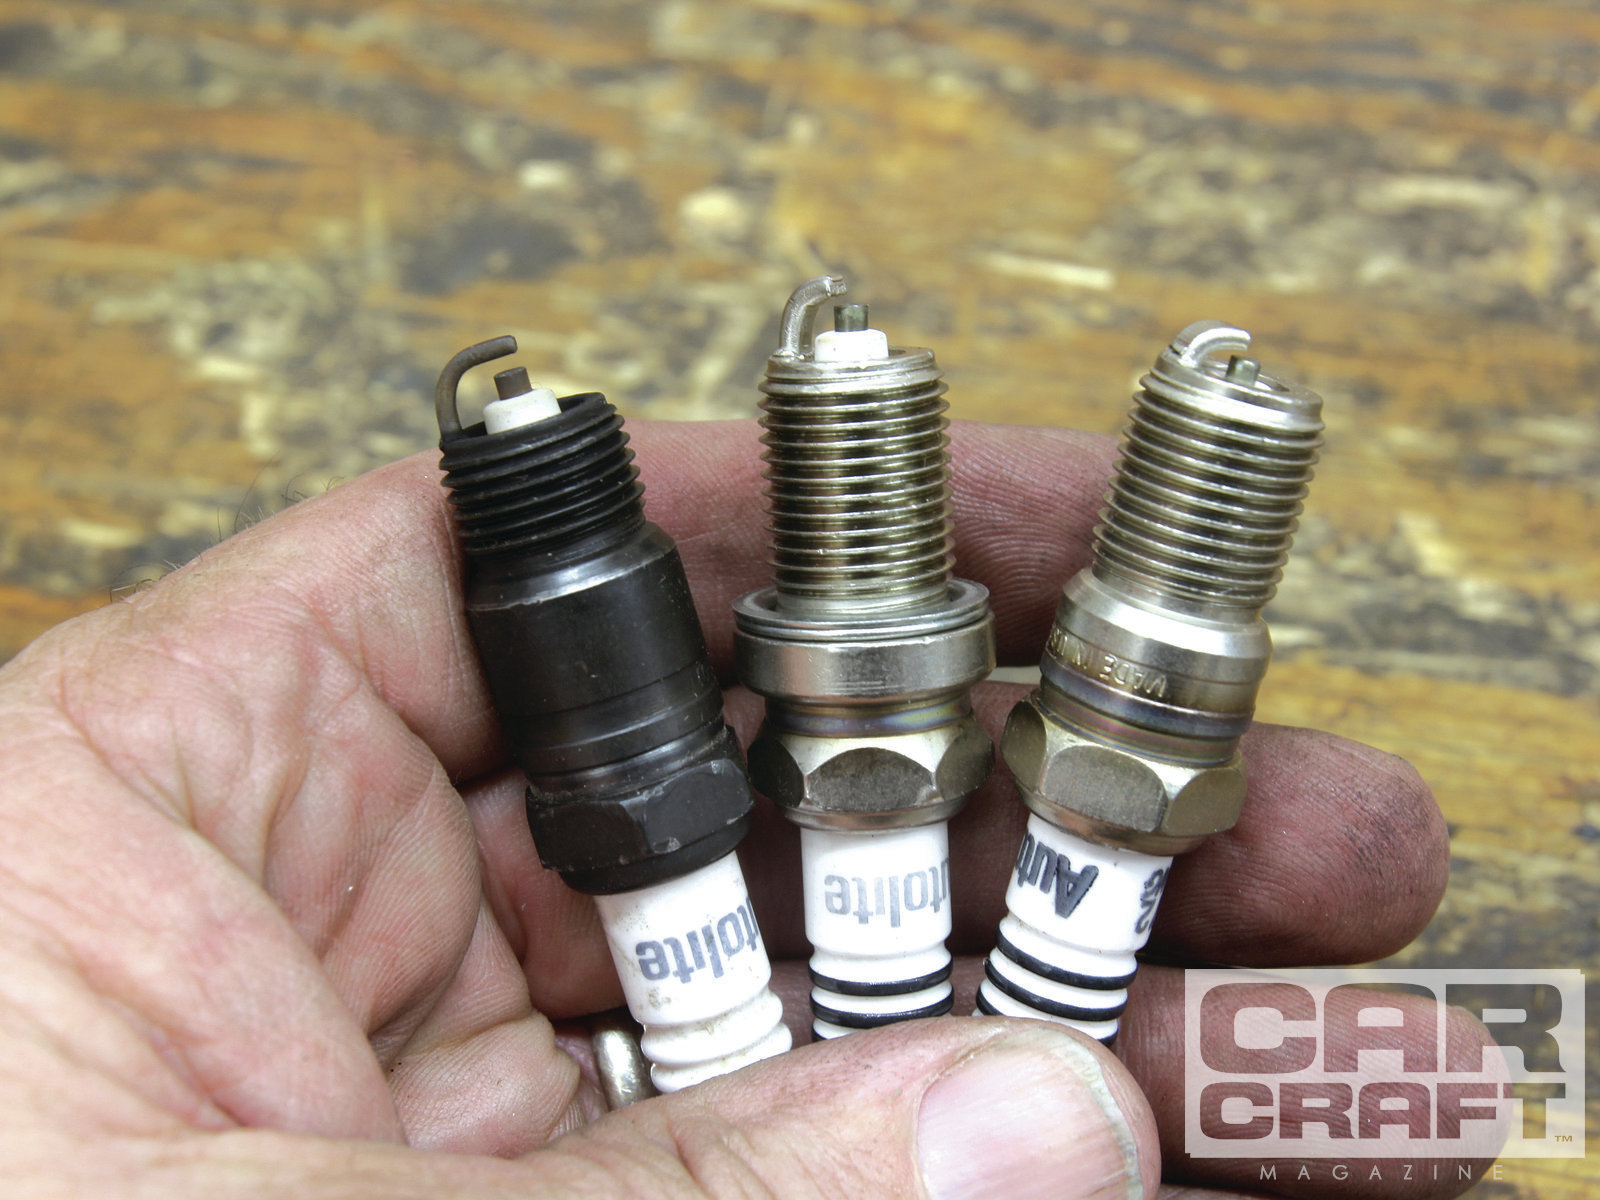 ccrp-1302-15+six-budget-ford-heads-that-work+spark-plugs.jpg